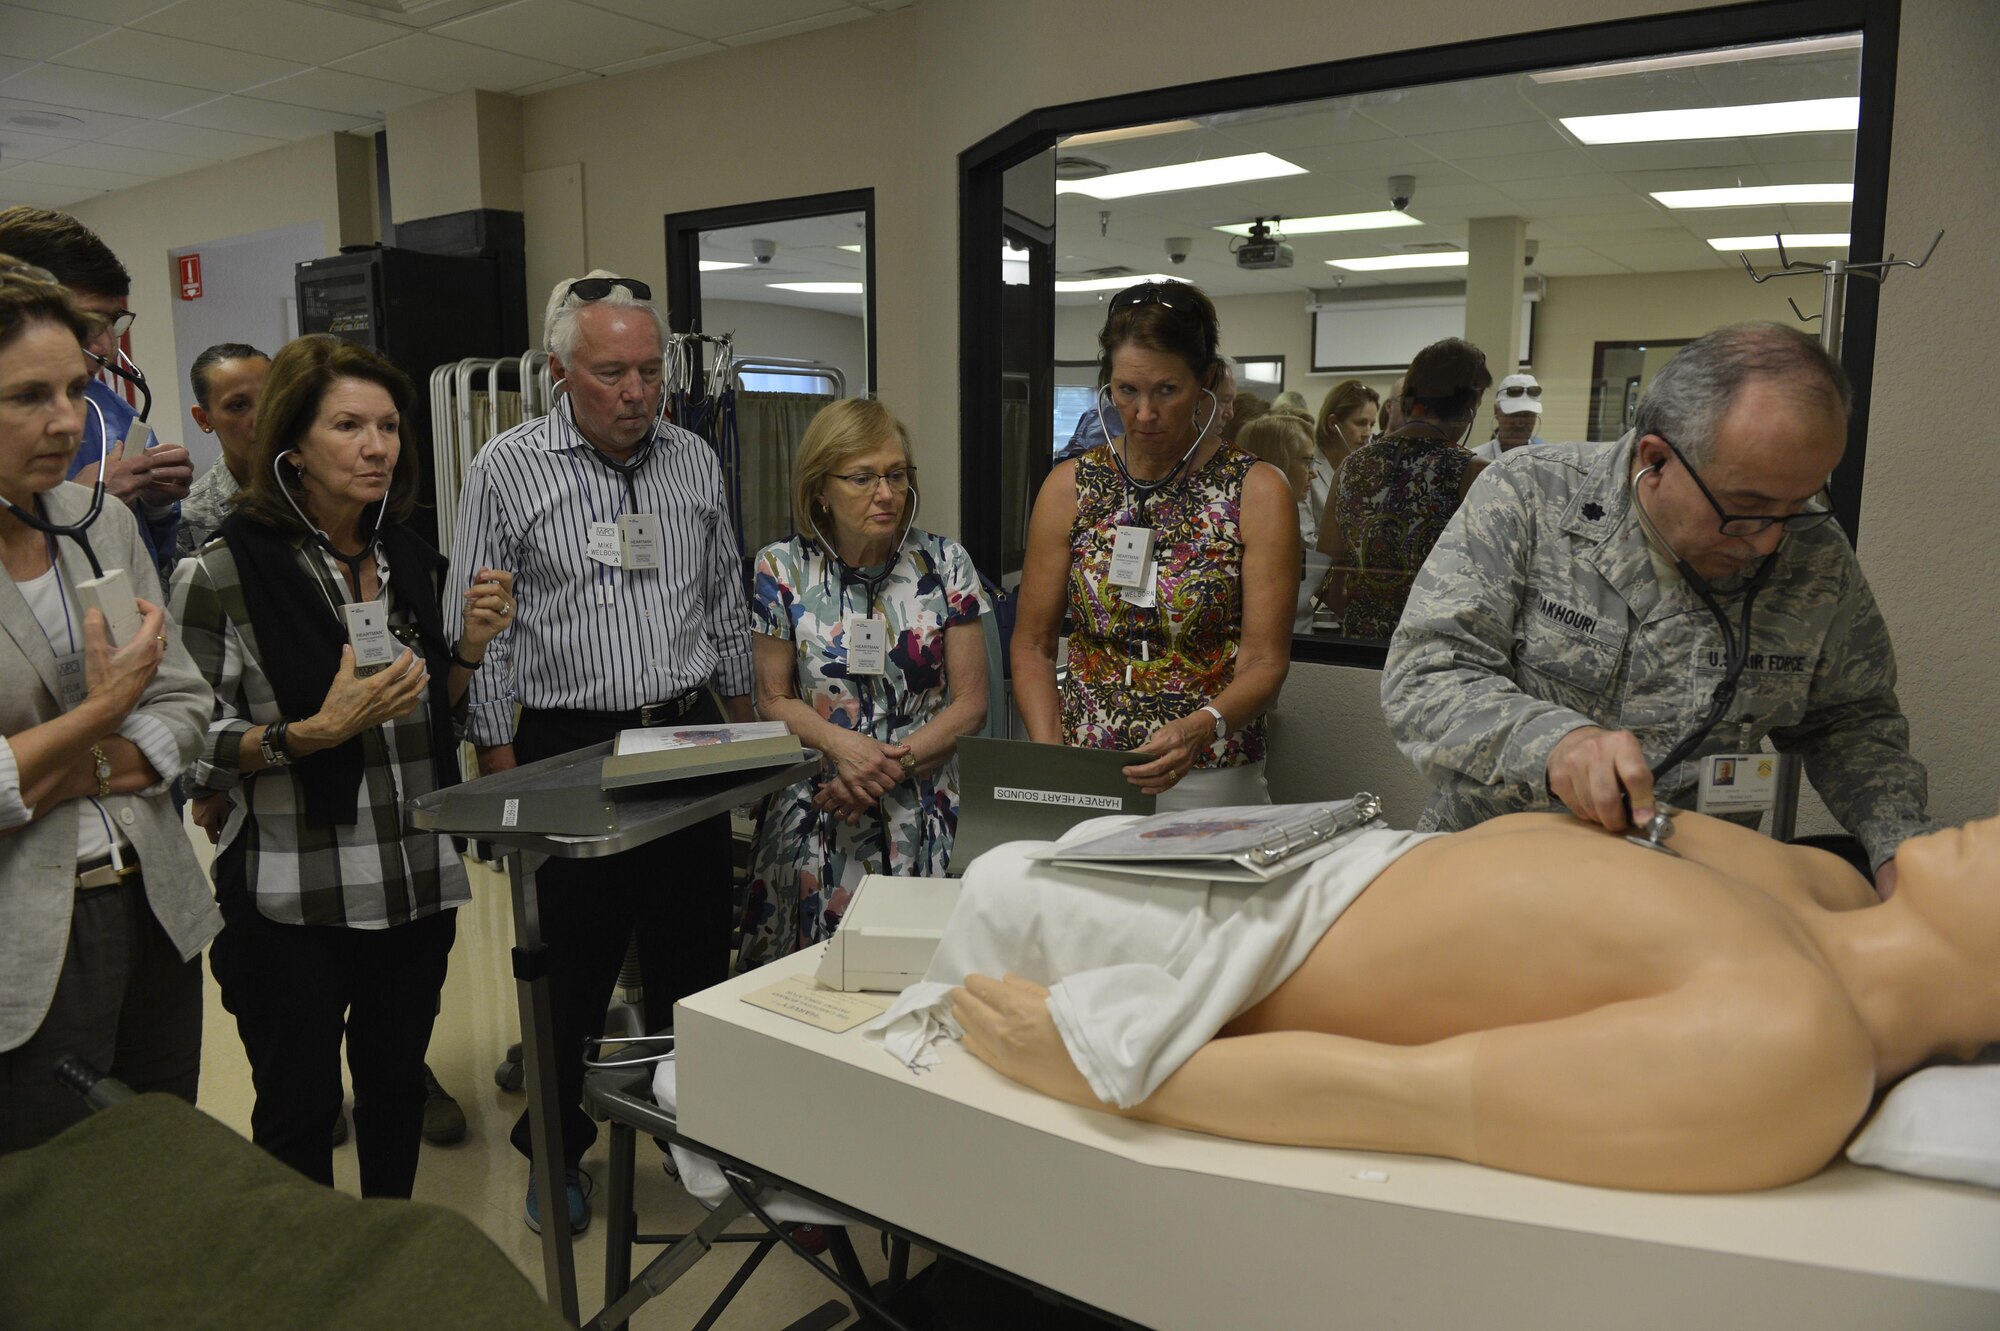 Members of the World President’s Group listen to different types of heartbeats through stethoscopes during a facilities tour April 21, 2016 at Luke Air Force Base, Ariz. The group, made up of civic leaders from the local community, was provided an opportunity to tour the base to learn more about Luke's mission. (U.S. Air Force photo by Senior Airman James Hensley)